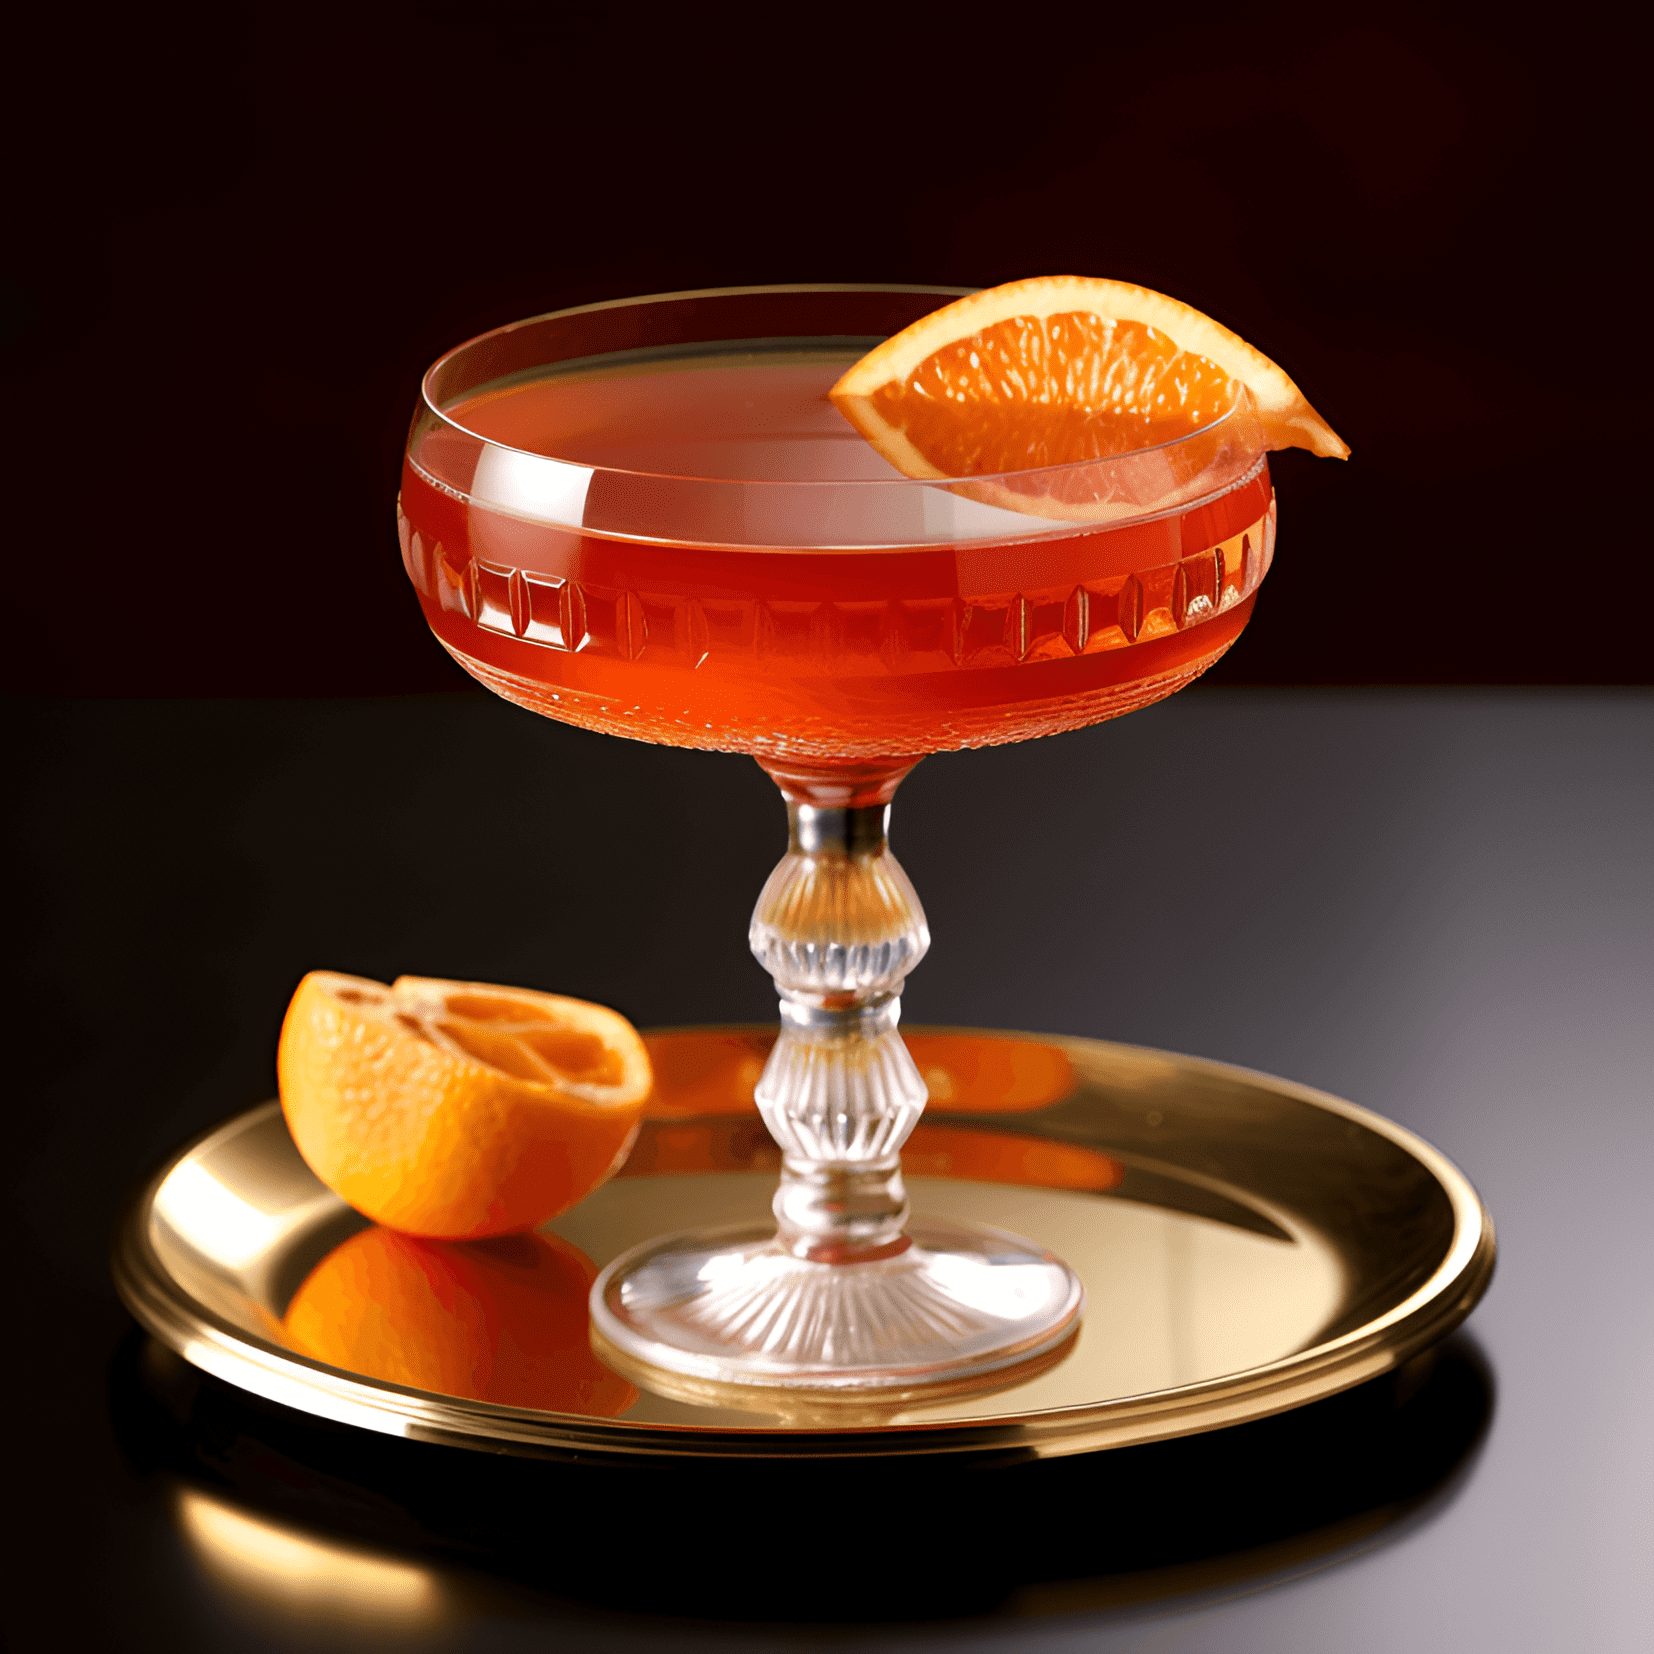 The Riviera cocktail has a balanced and refreshing taste, with a combination of sweet, sour, and bitter flavors. It is light and crisp, with a hint of citrus and a subtle herbal undertone.